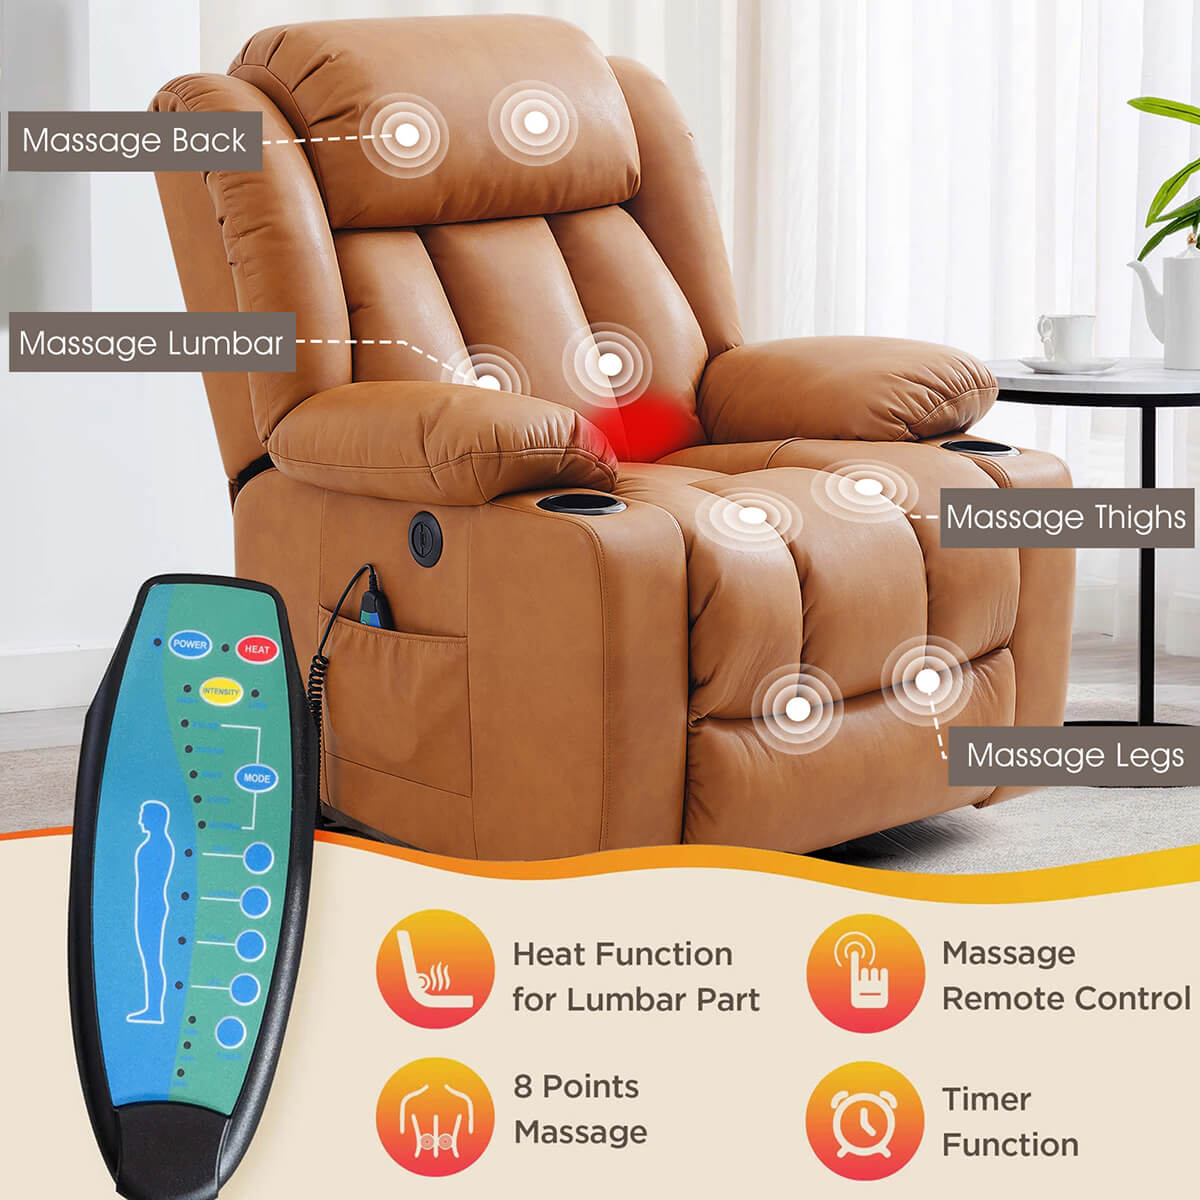 Soulout Luxury Lift Chair Recliners With Massage and Heating, Orange